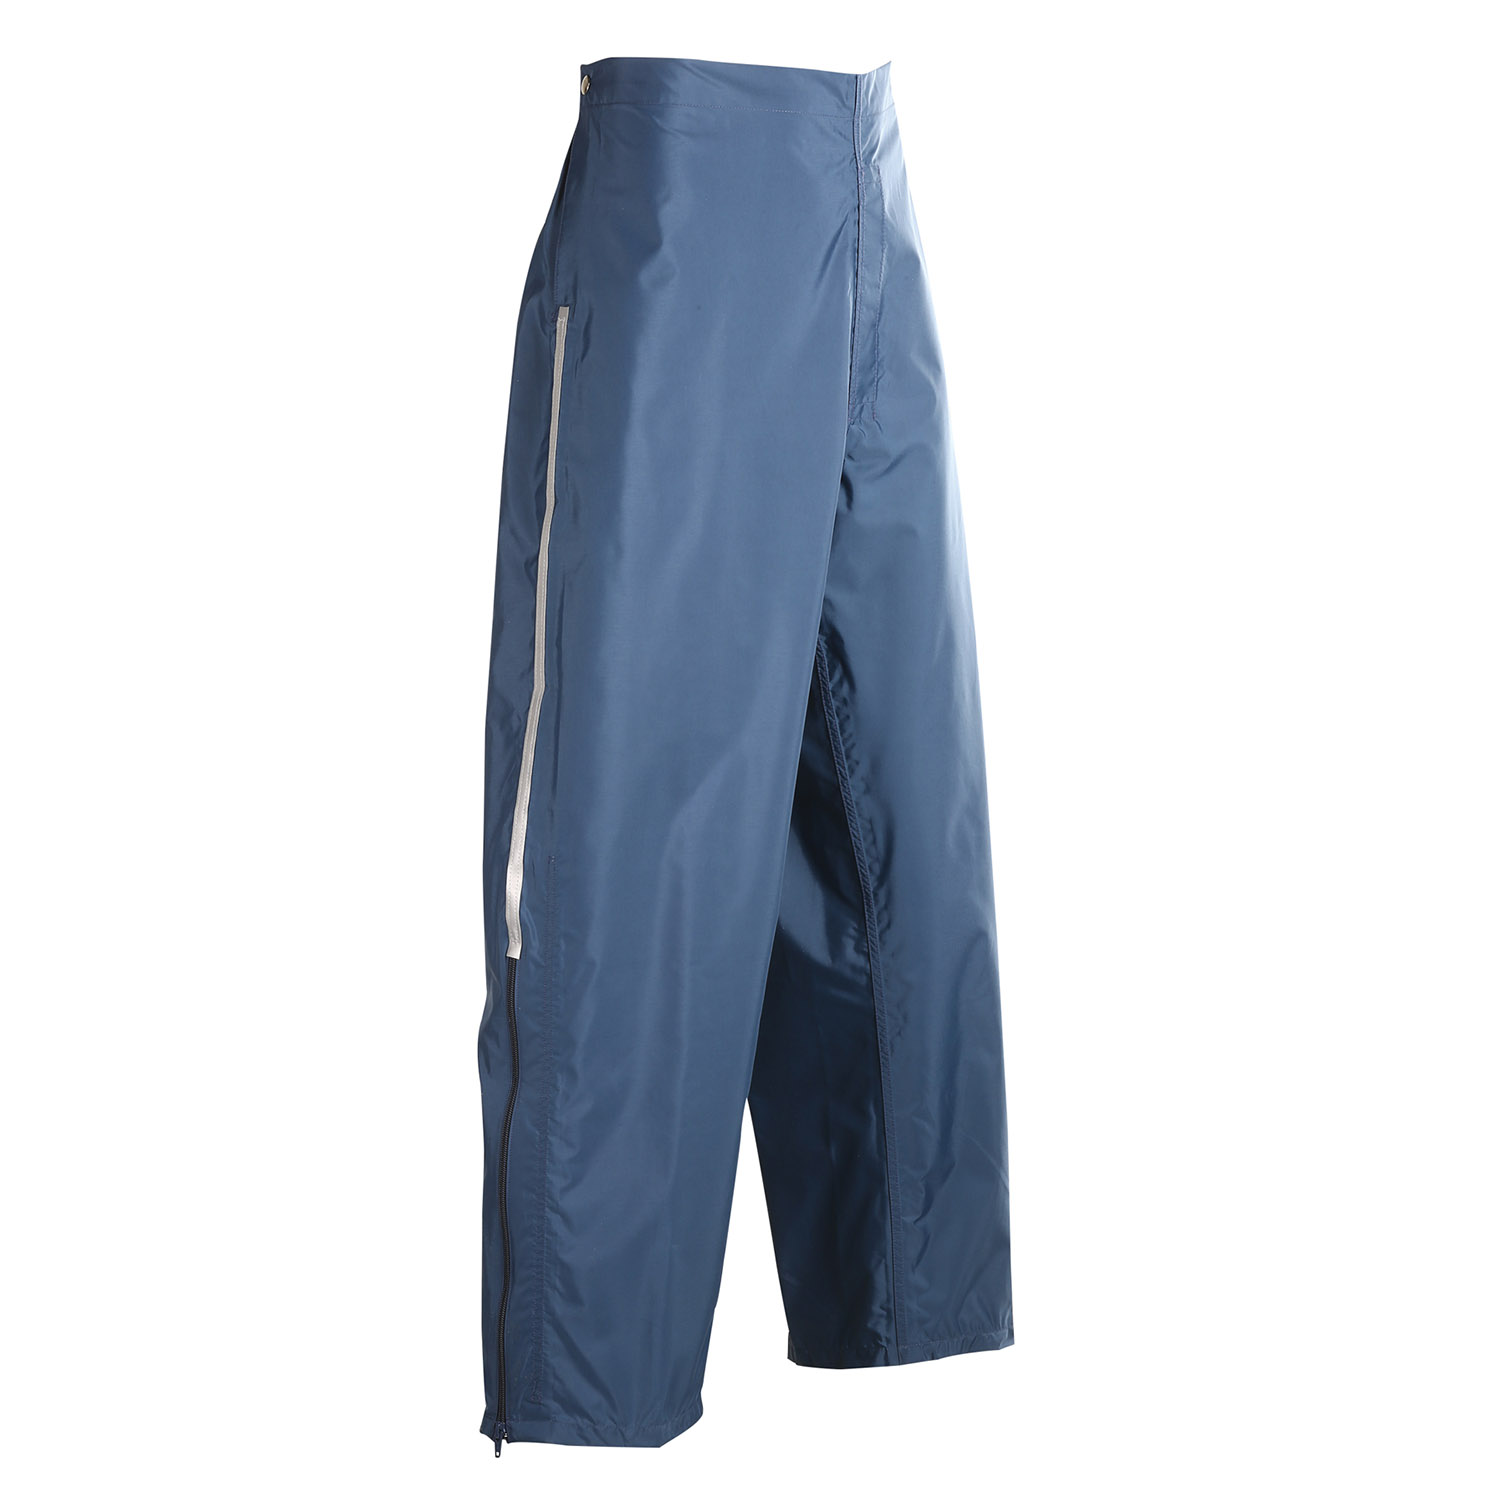 Breathable Postal Rain Pants for Letter Carriers and Mo